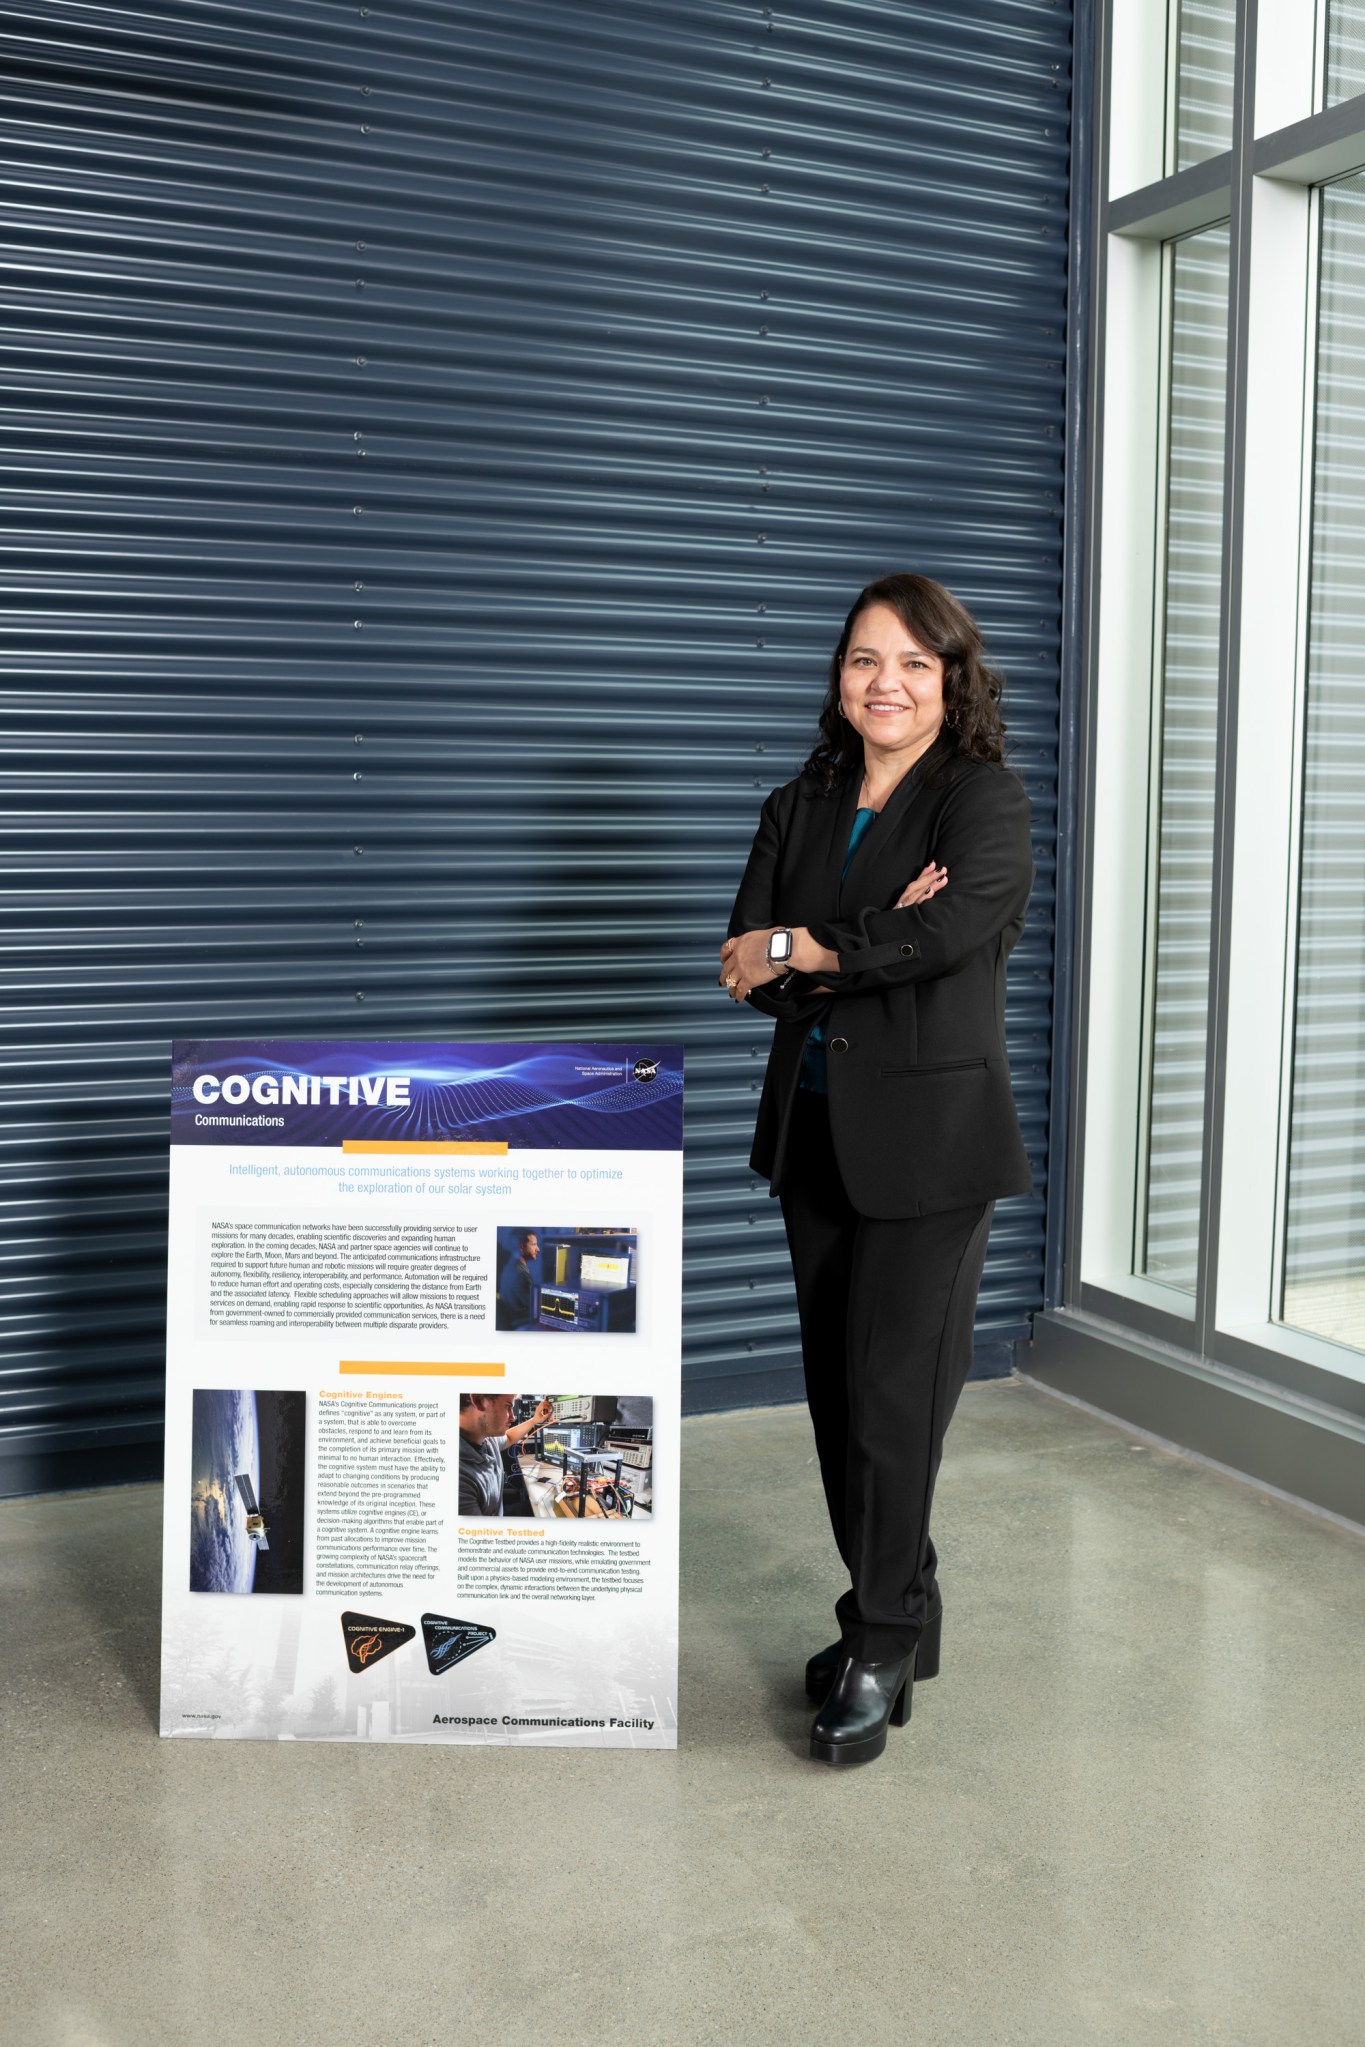 Janette C. Briones stands to the right of a poster about cognitive communications. She is crossing her arms and wearing professional attire. She poses in front of a blue metal wall.